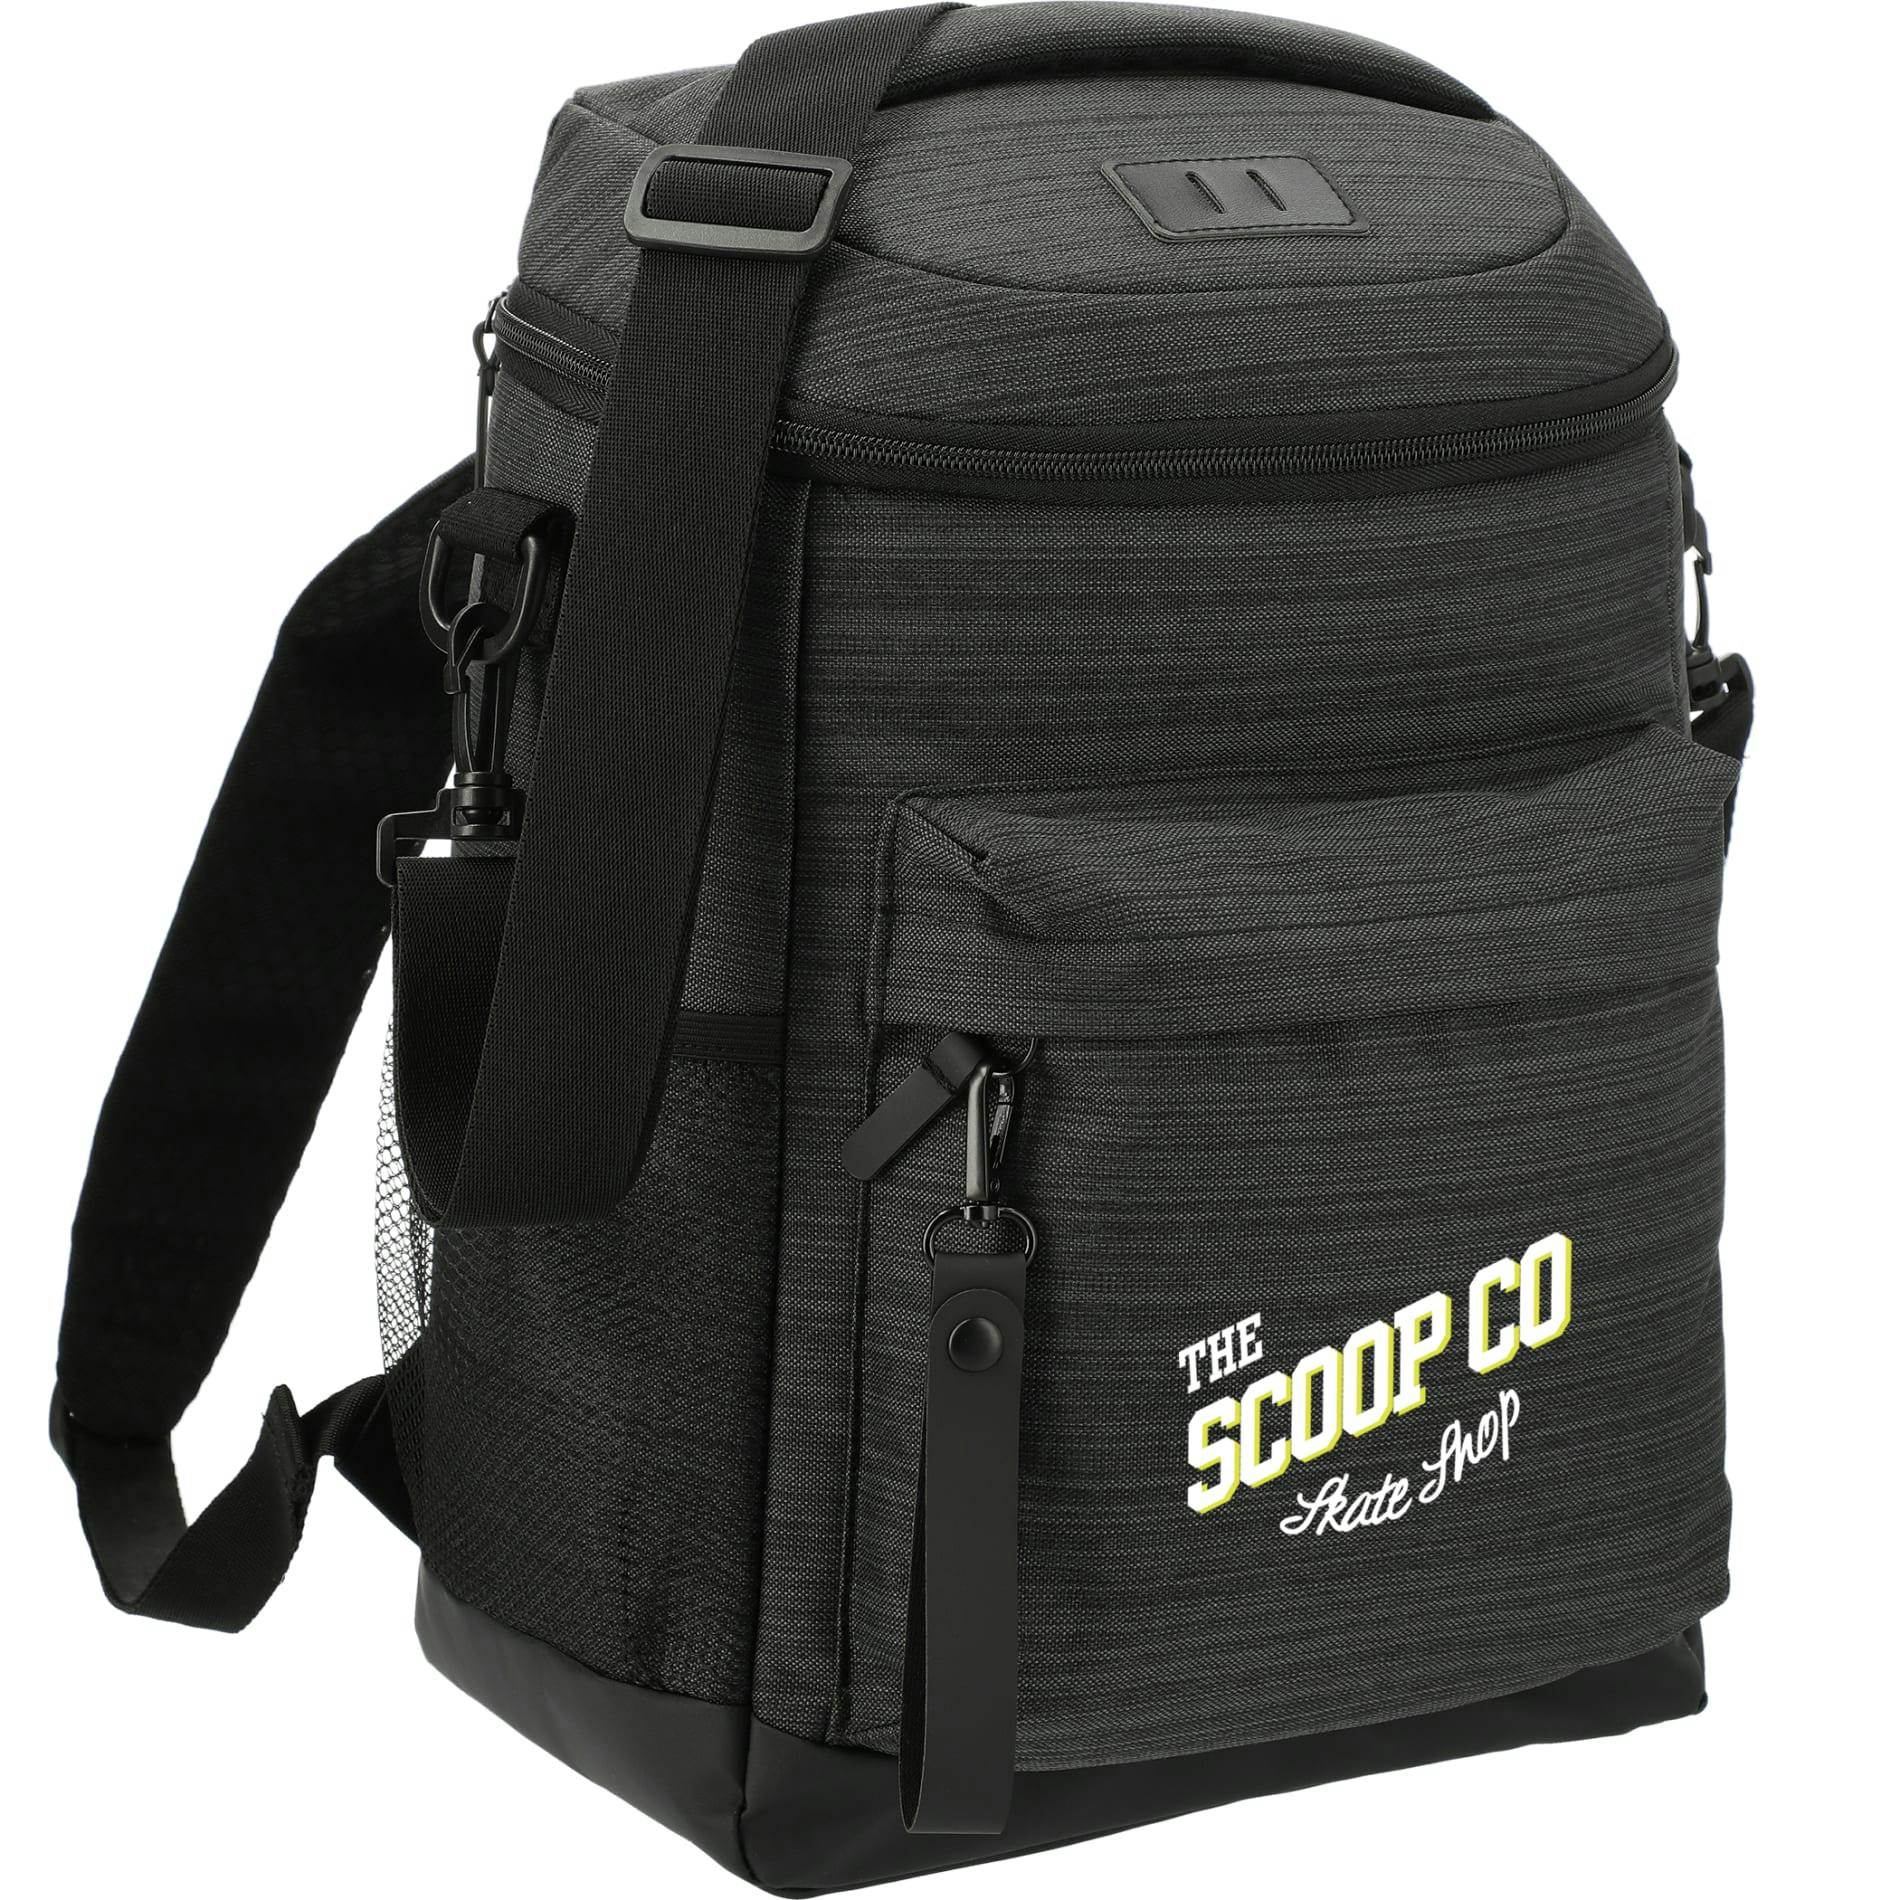 NBN Whitby 24 Can Backpack Cooler - additional Image 1